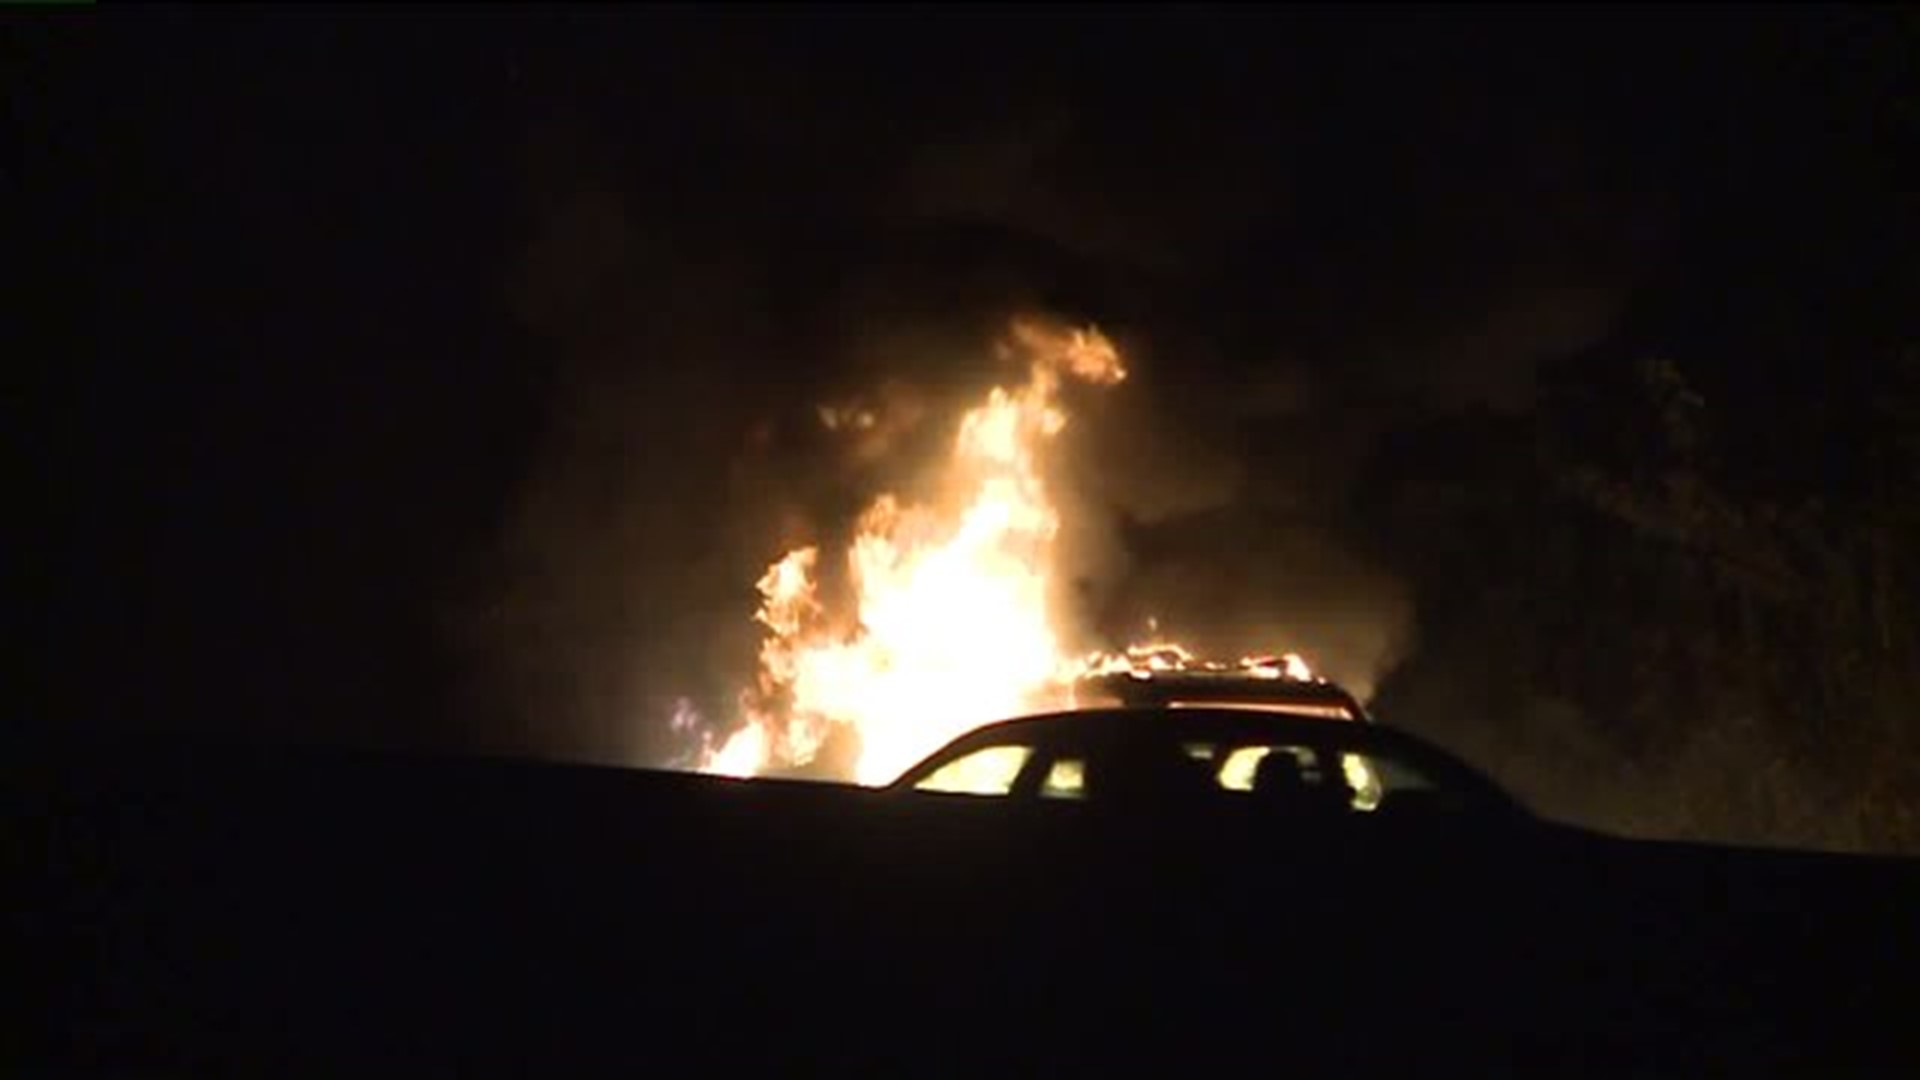 Vehicle fire along I-83 in York County captured on video